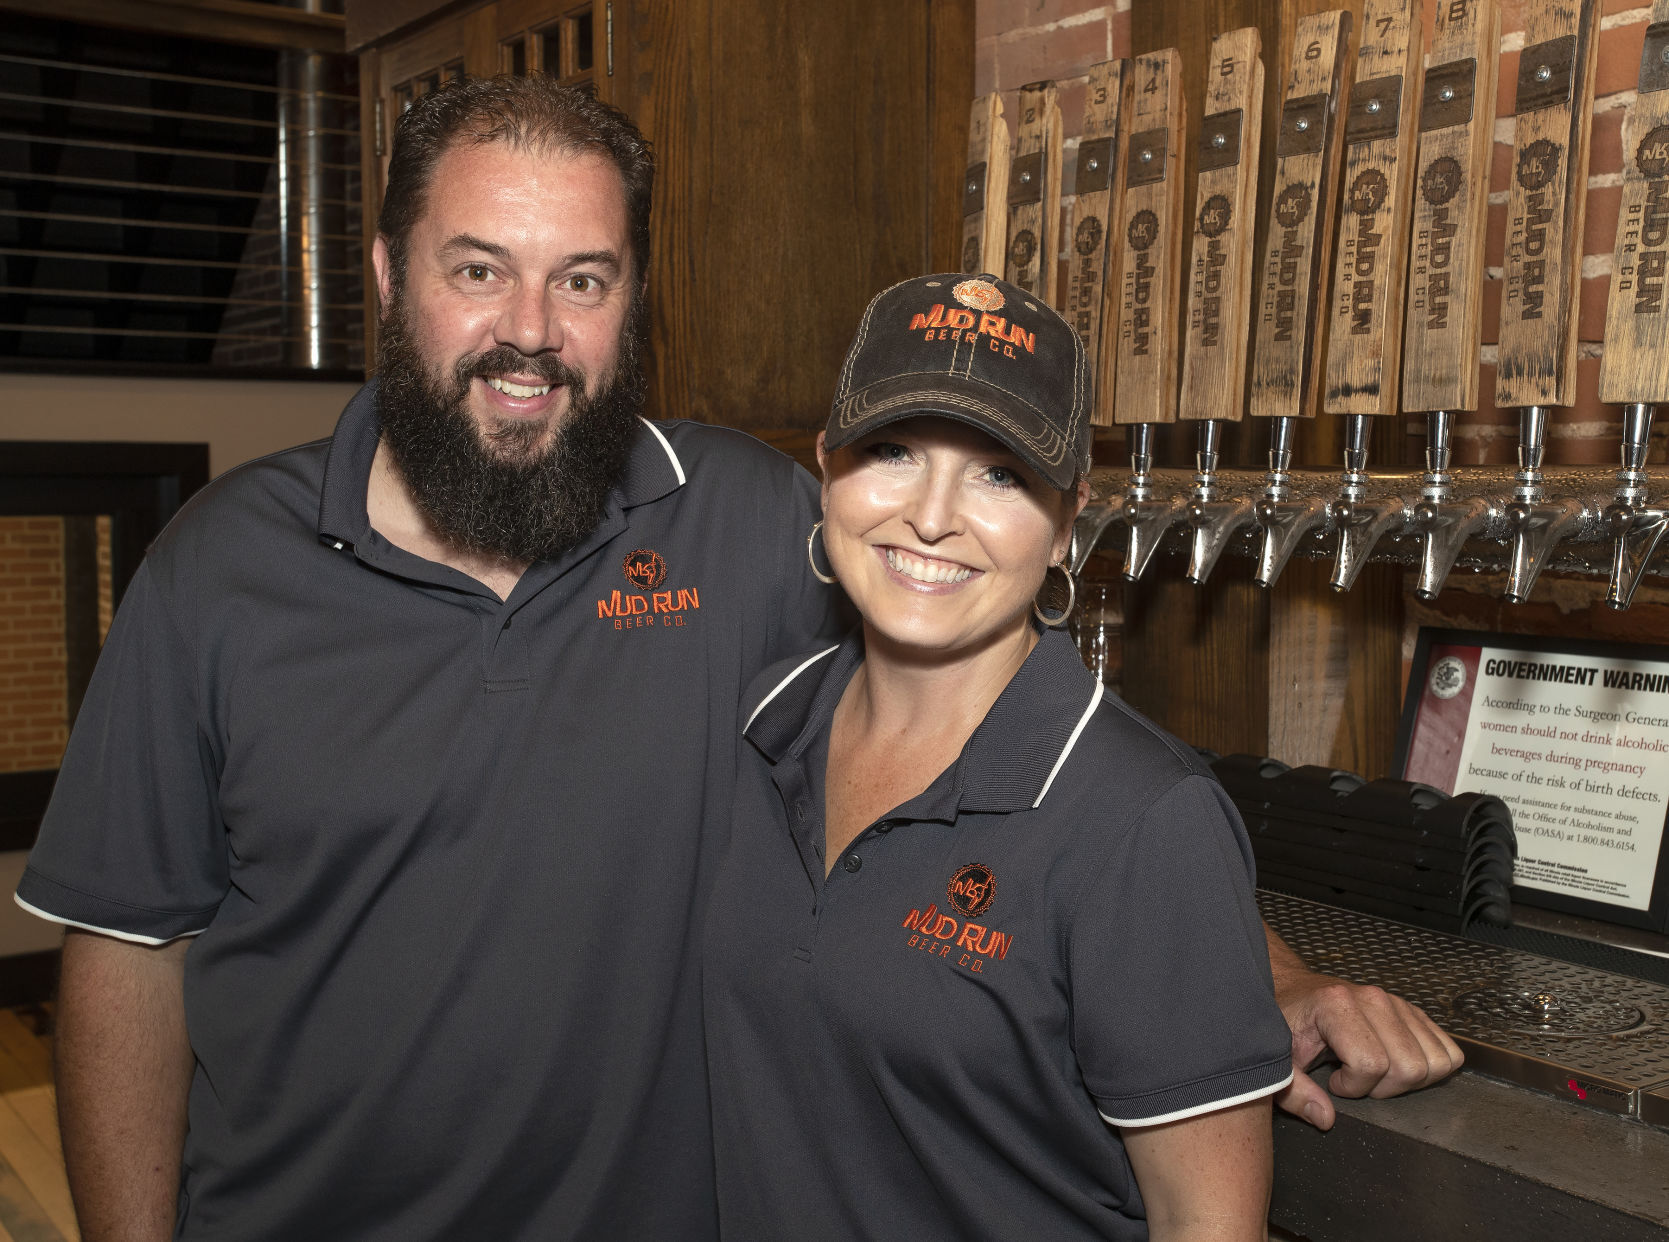 Mud Run Beer Co. owners Kevin and Amanda Pierce appear in their brewpub in downtown Stockton on Thursday. PHOTO CREDIT: Stephen Gassman, Telegraph Herald